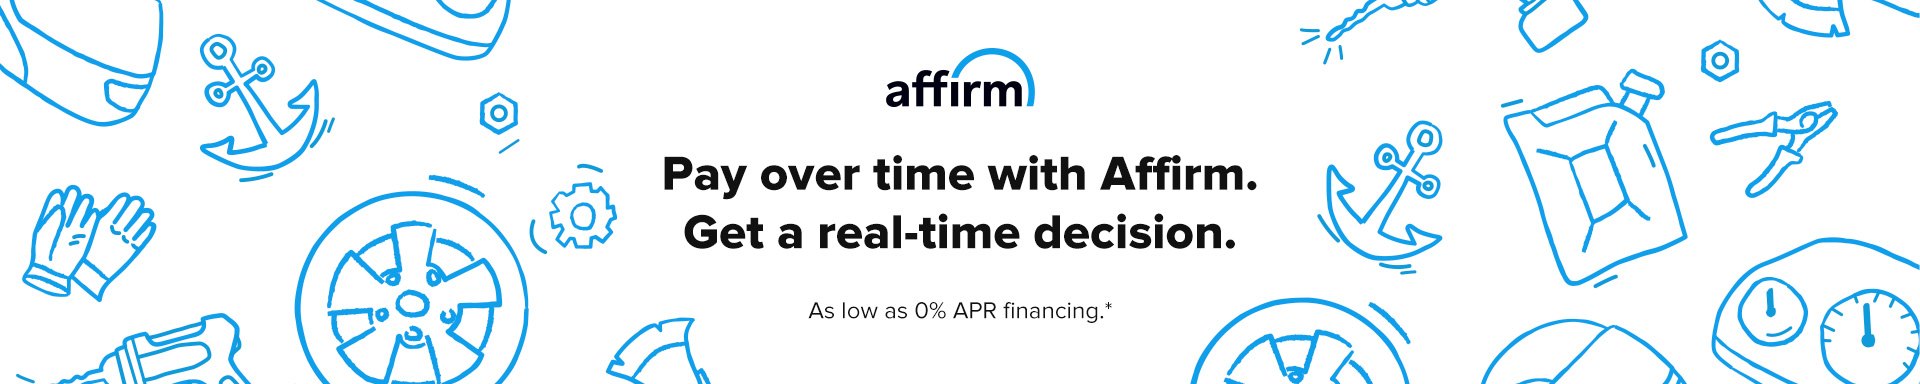 Affirm | Easy Financing | Pay Later with Affirm - BOATiD.com